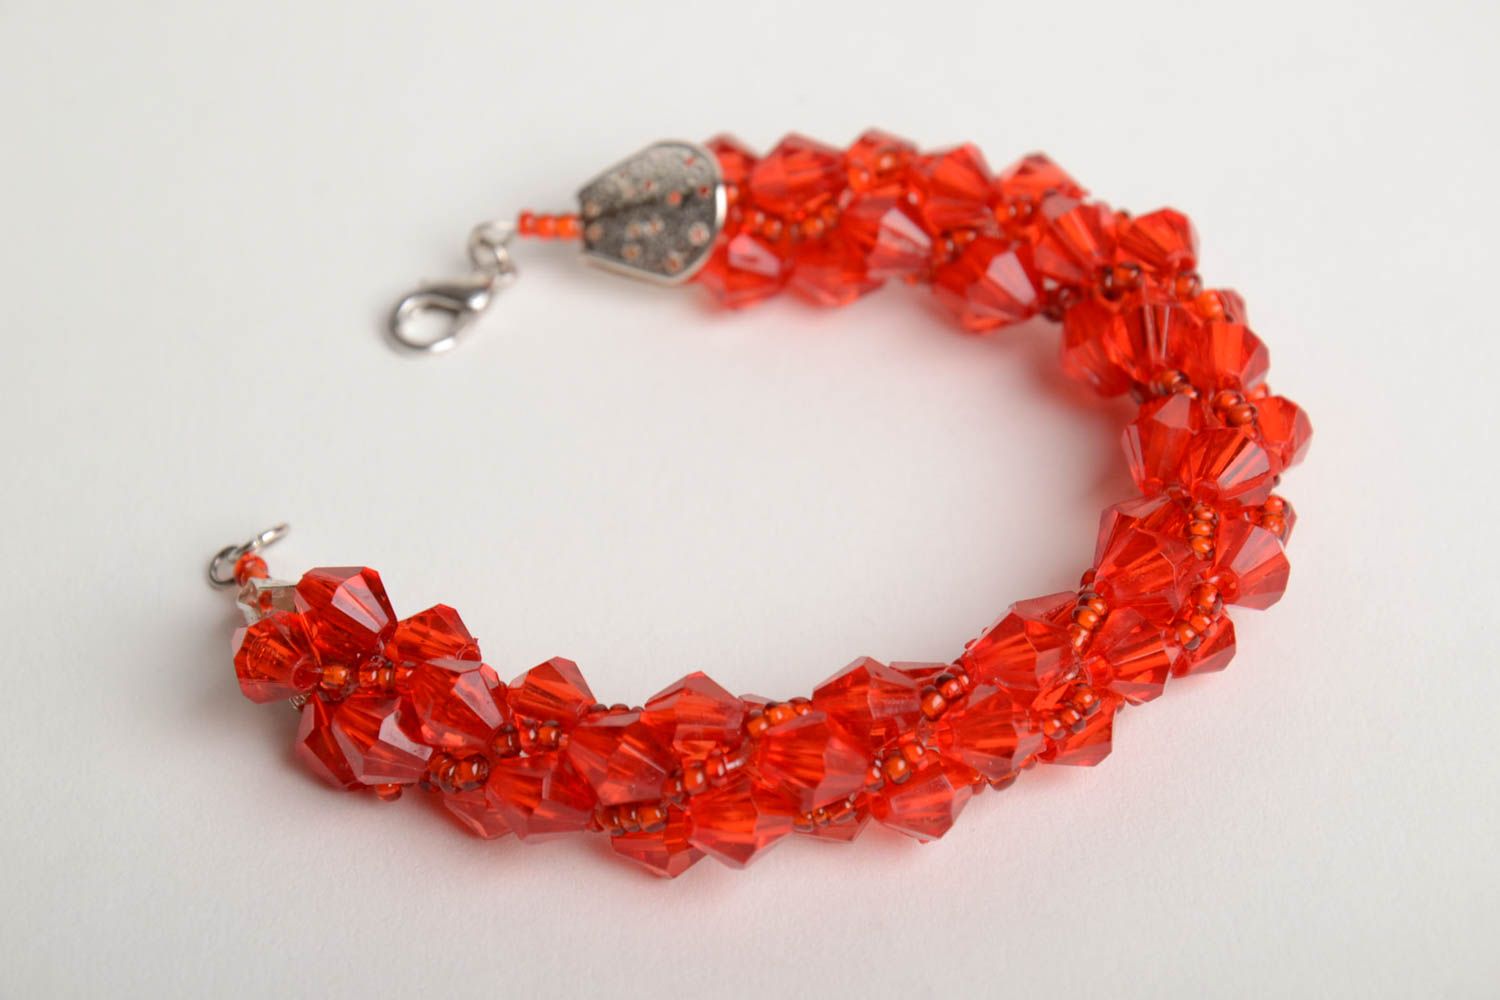 Handmade wrist bracelet crocheted of red Czech seed beads and faceted beads photo 3